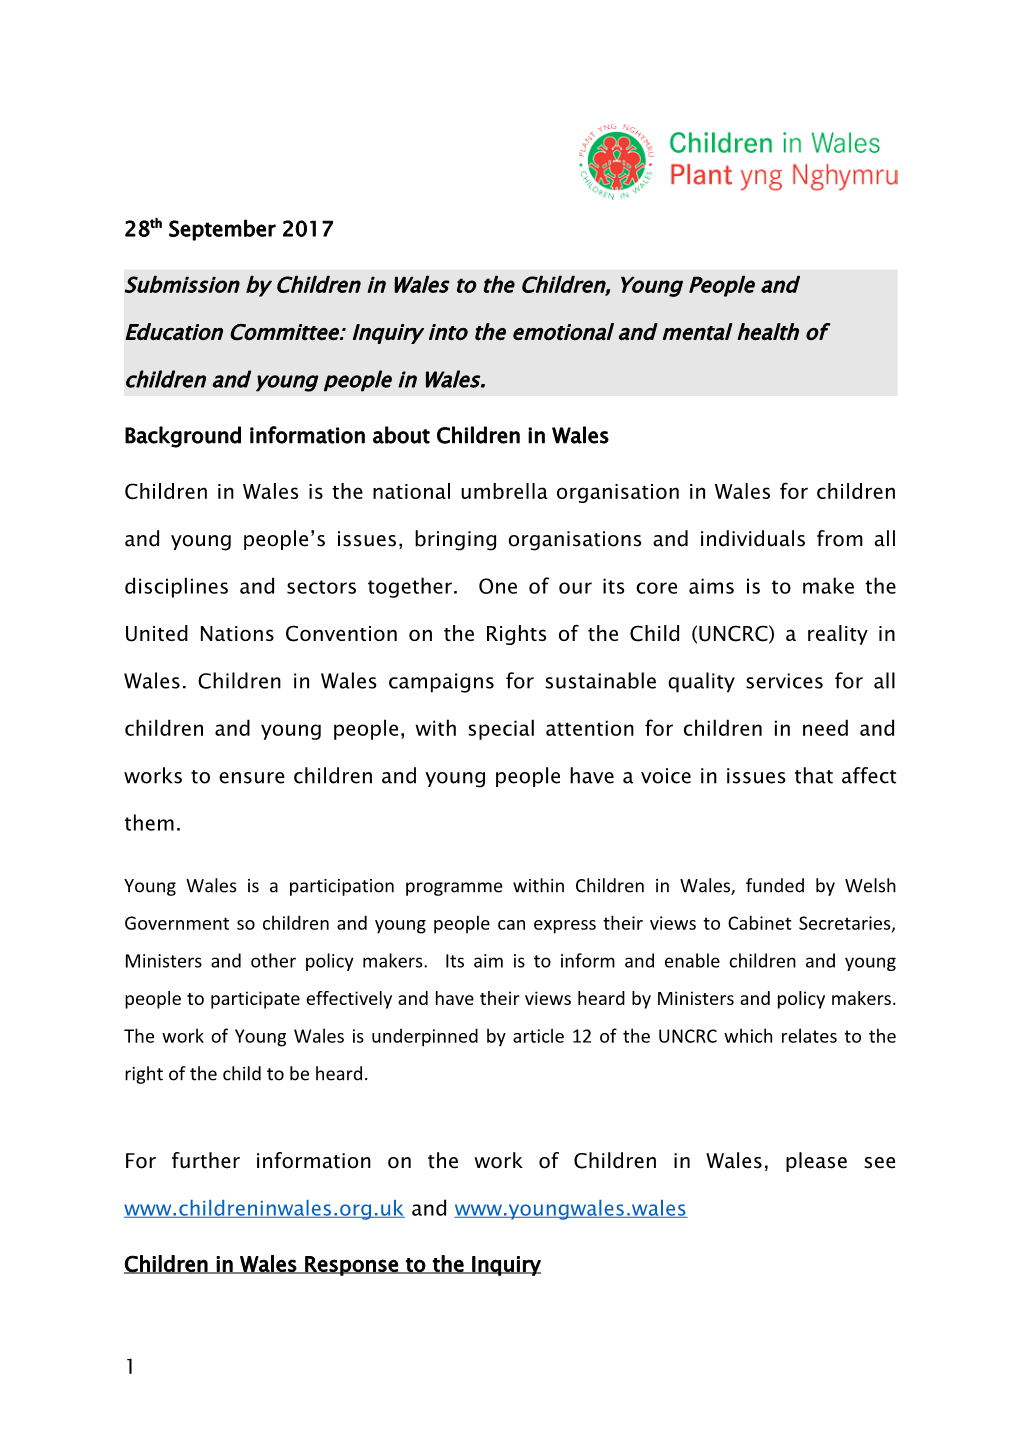 Background Information About Children in Wales